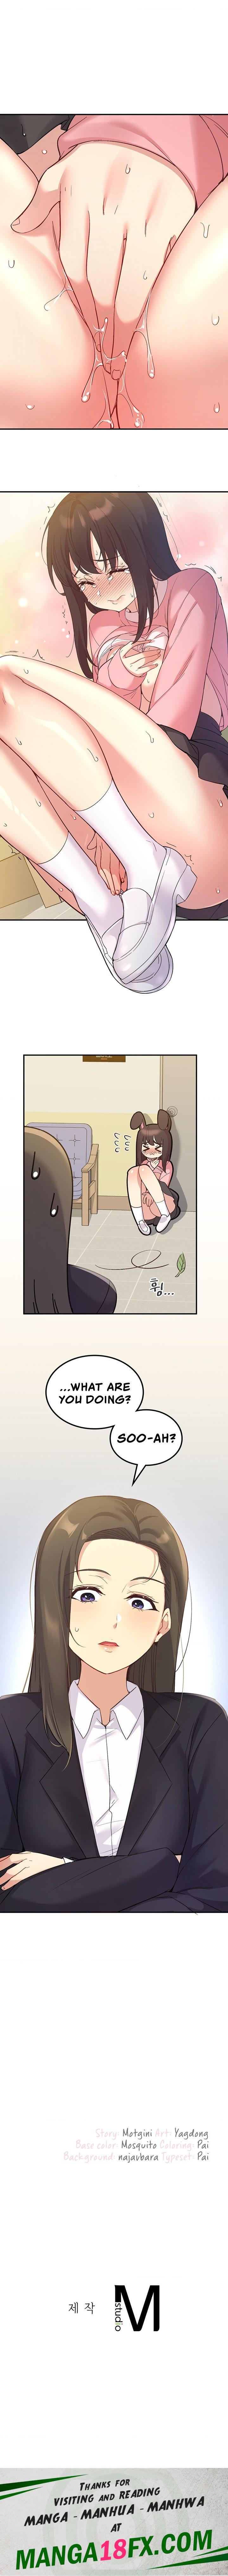 Smart App Life - Chapter 33 Page 14